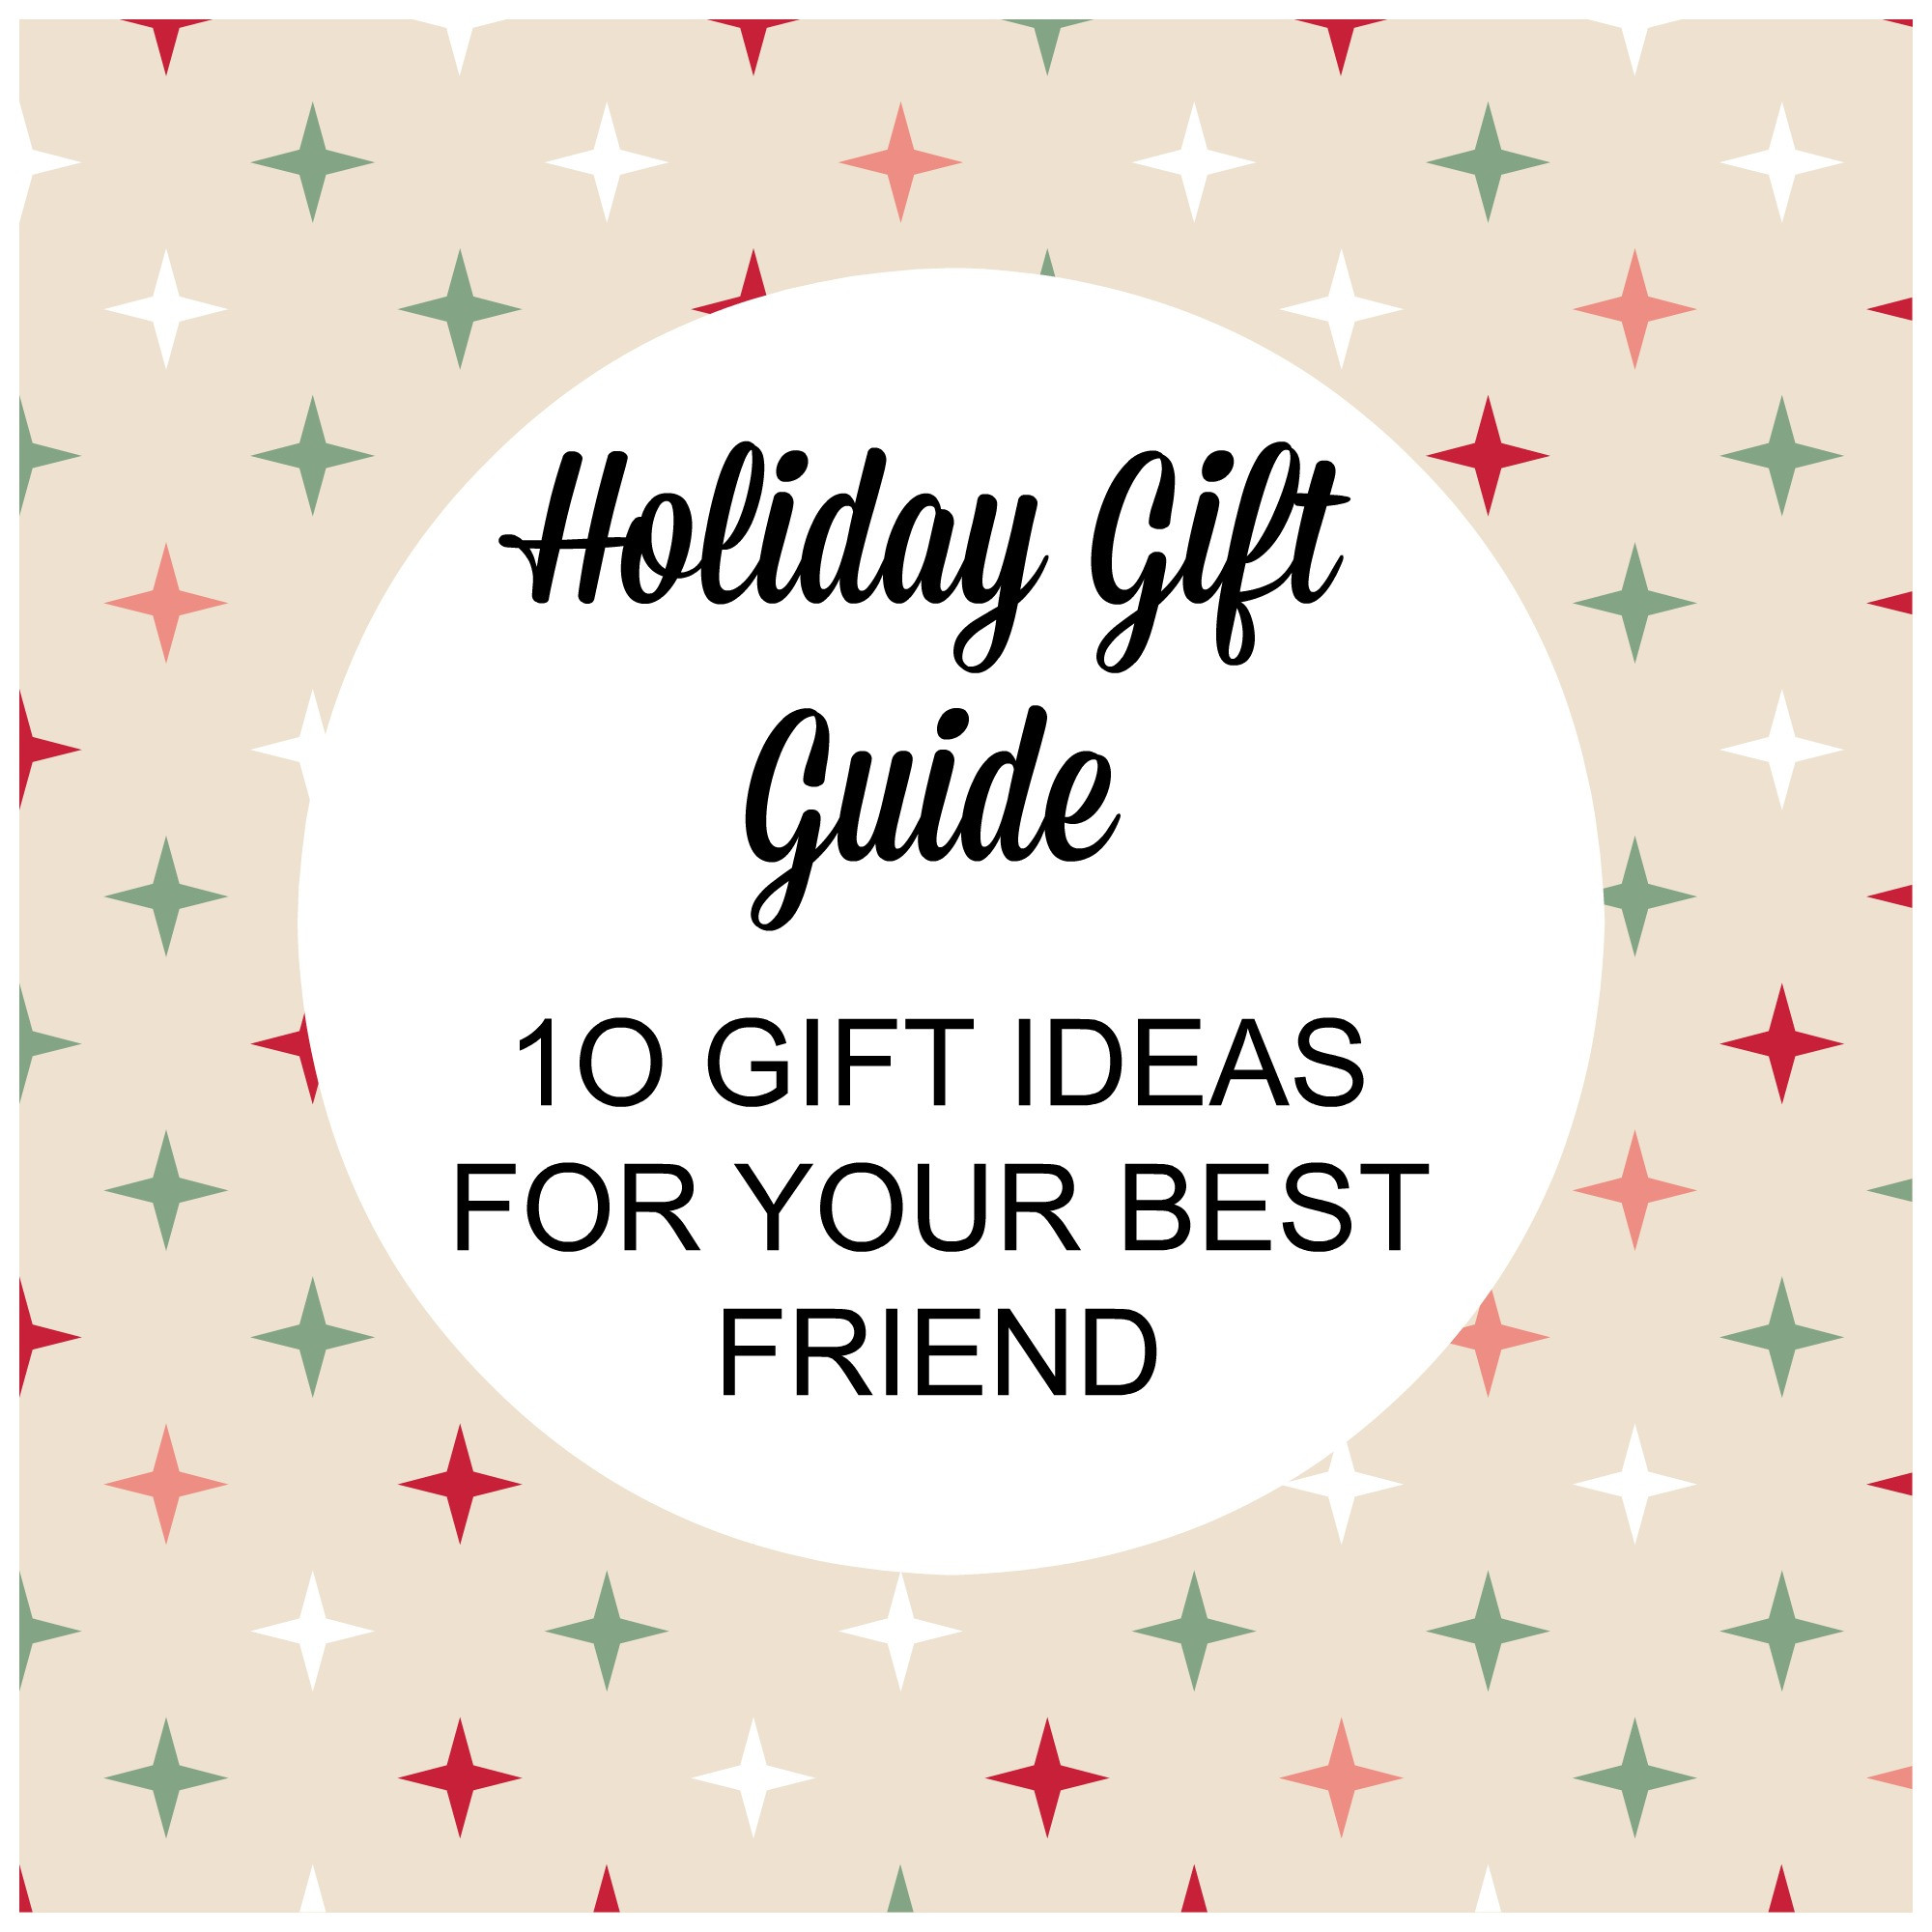 Holiday Gift Ideas For Your Best Friend
 Paper & Fox